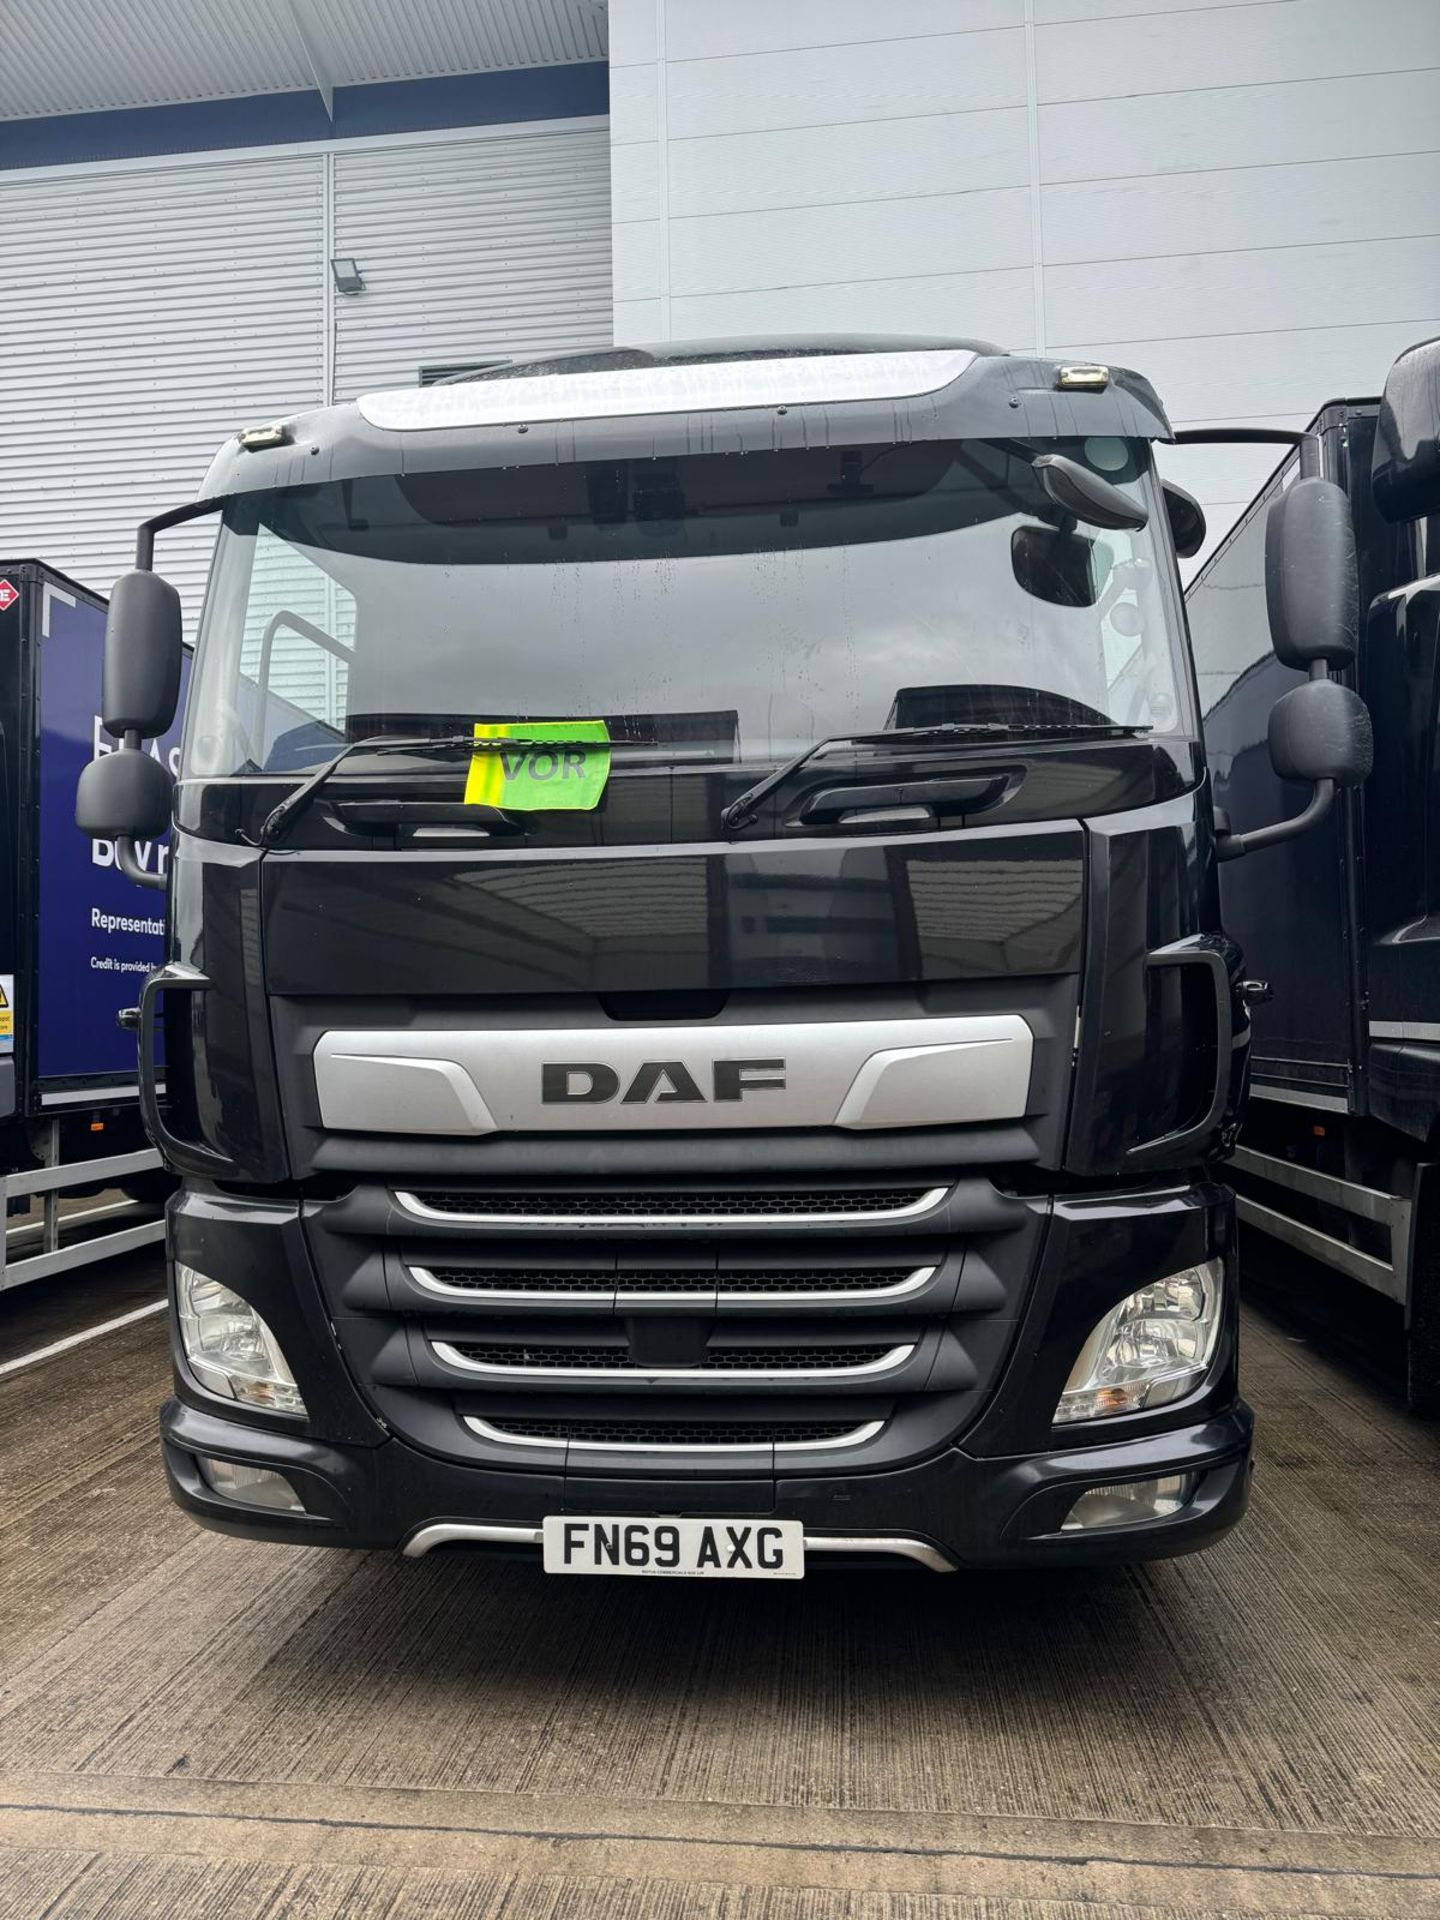 2019, DAF CF 260 FA (Ex-Fleet Owned & Maintained) - FN69 AXG (18 Ton Rigid Truck with Tail Lift) - Image 4 of 16